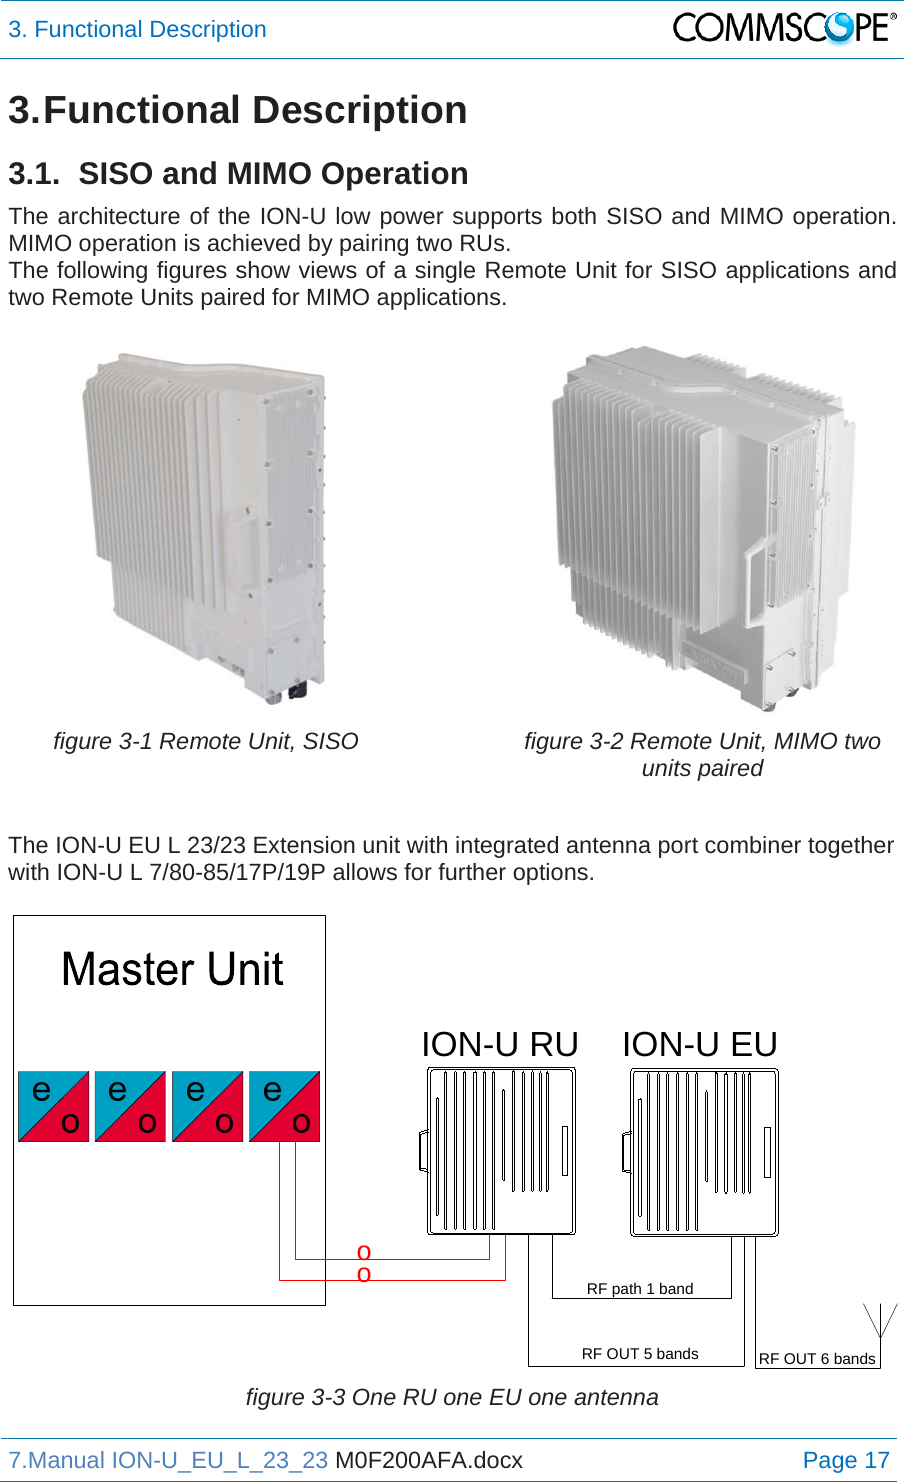 3. Functional Description  7.Manual ION-U_EU_L_23_23 M0F200AFA.docx Page 17 3. Functional  Description 3.1.  SISO and MIMO Operation The architecture of the ION-U low power supports both SISO and MIMO operation. MIMO operation is achieved by pairing two RUs. The following figures show views of a single Remote Unit for SISO applications and two Remote Units paired for MIMO applications.   figure 3-1 Remote Unit, SISO    figure 3-2 Remote Unit, MIMO two units paired  The ION-U EU L 23/23 Extension unit with integrated antenna port combiner together with ION-U L 7/80-85/17P/19P allows for further options.   figure 3-3 One RU one EU one antenna ooION-U RURF OUT 5 bandsRF path 1 bandION-U EURF OUT 6 bands